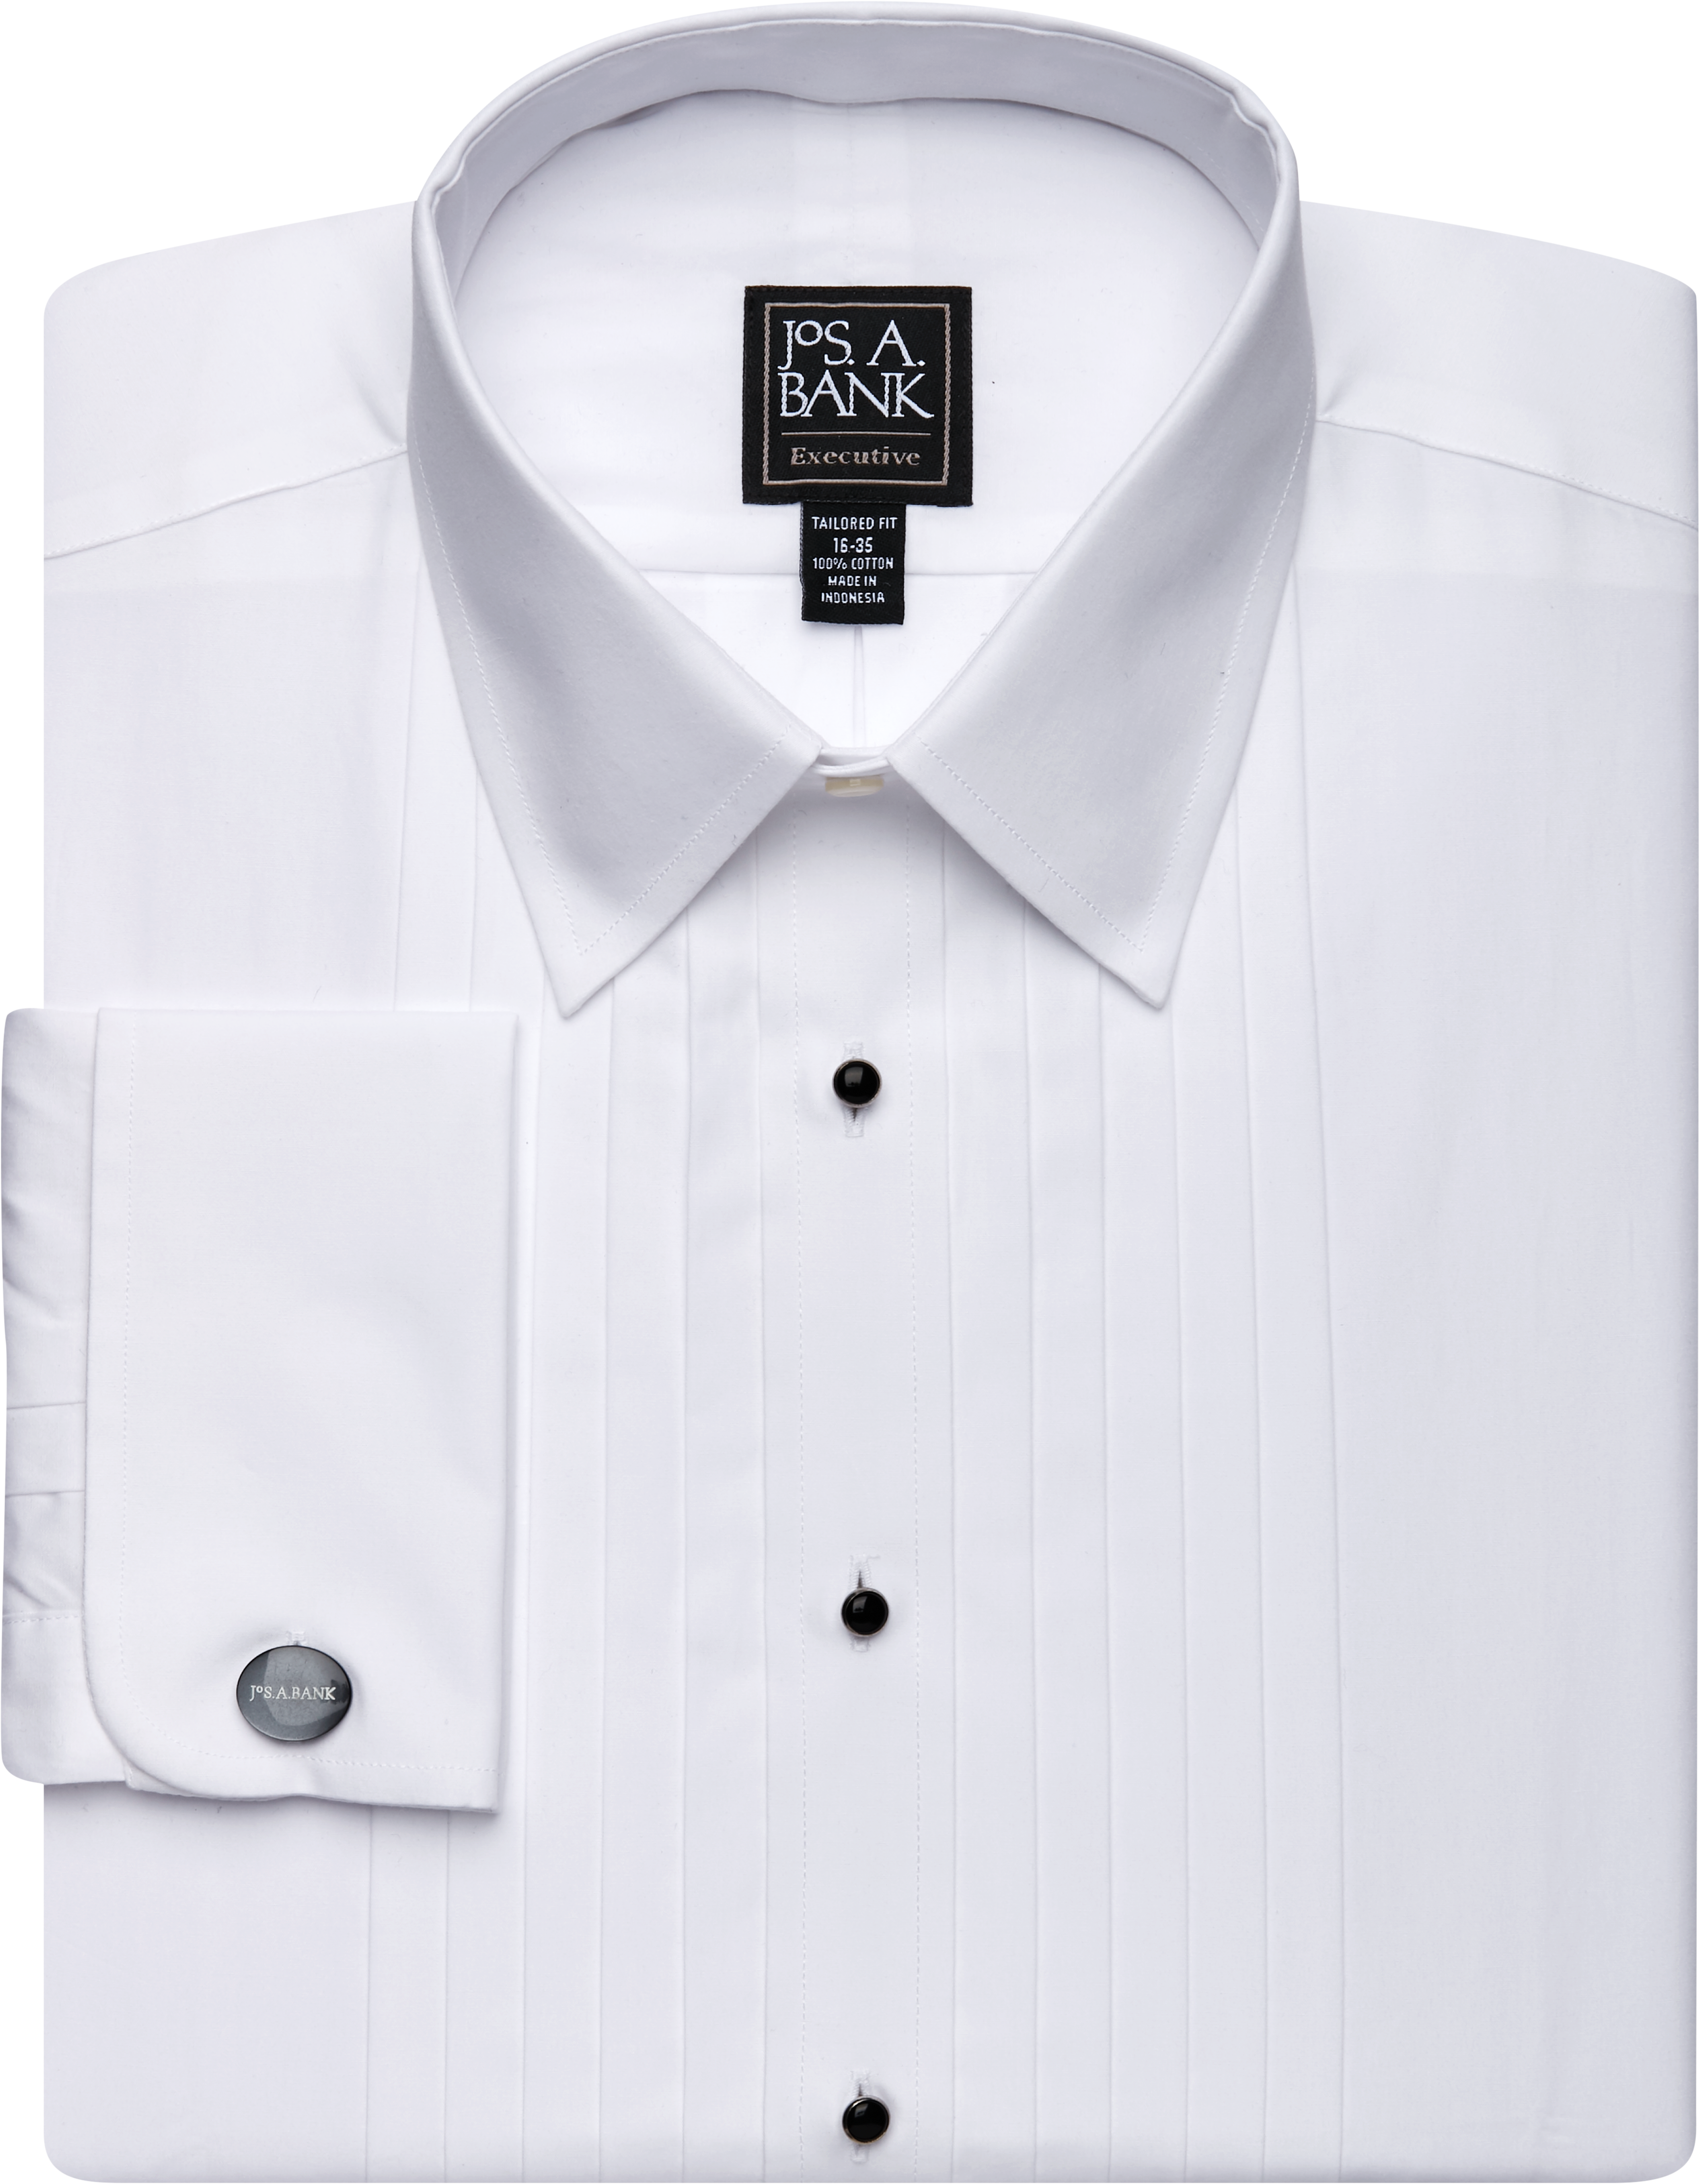 Image of JoS. A. Bank Men's Executive Collection Traditional Fit Point Collar French Cuff Formal Dress Shirt - Big & Tall, White, 16 1/2x33